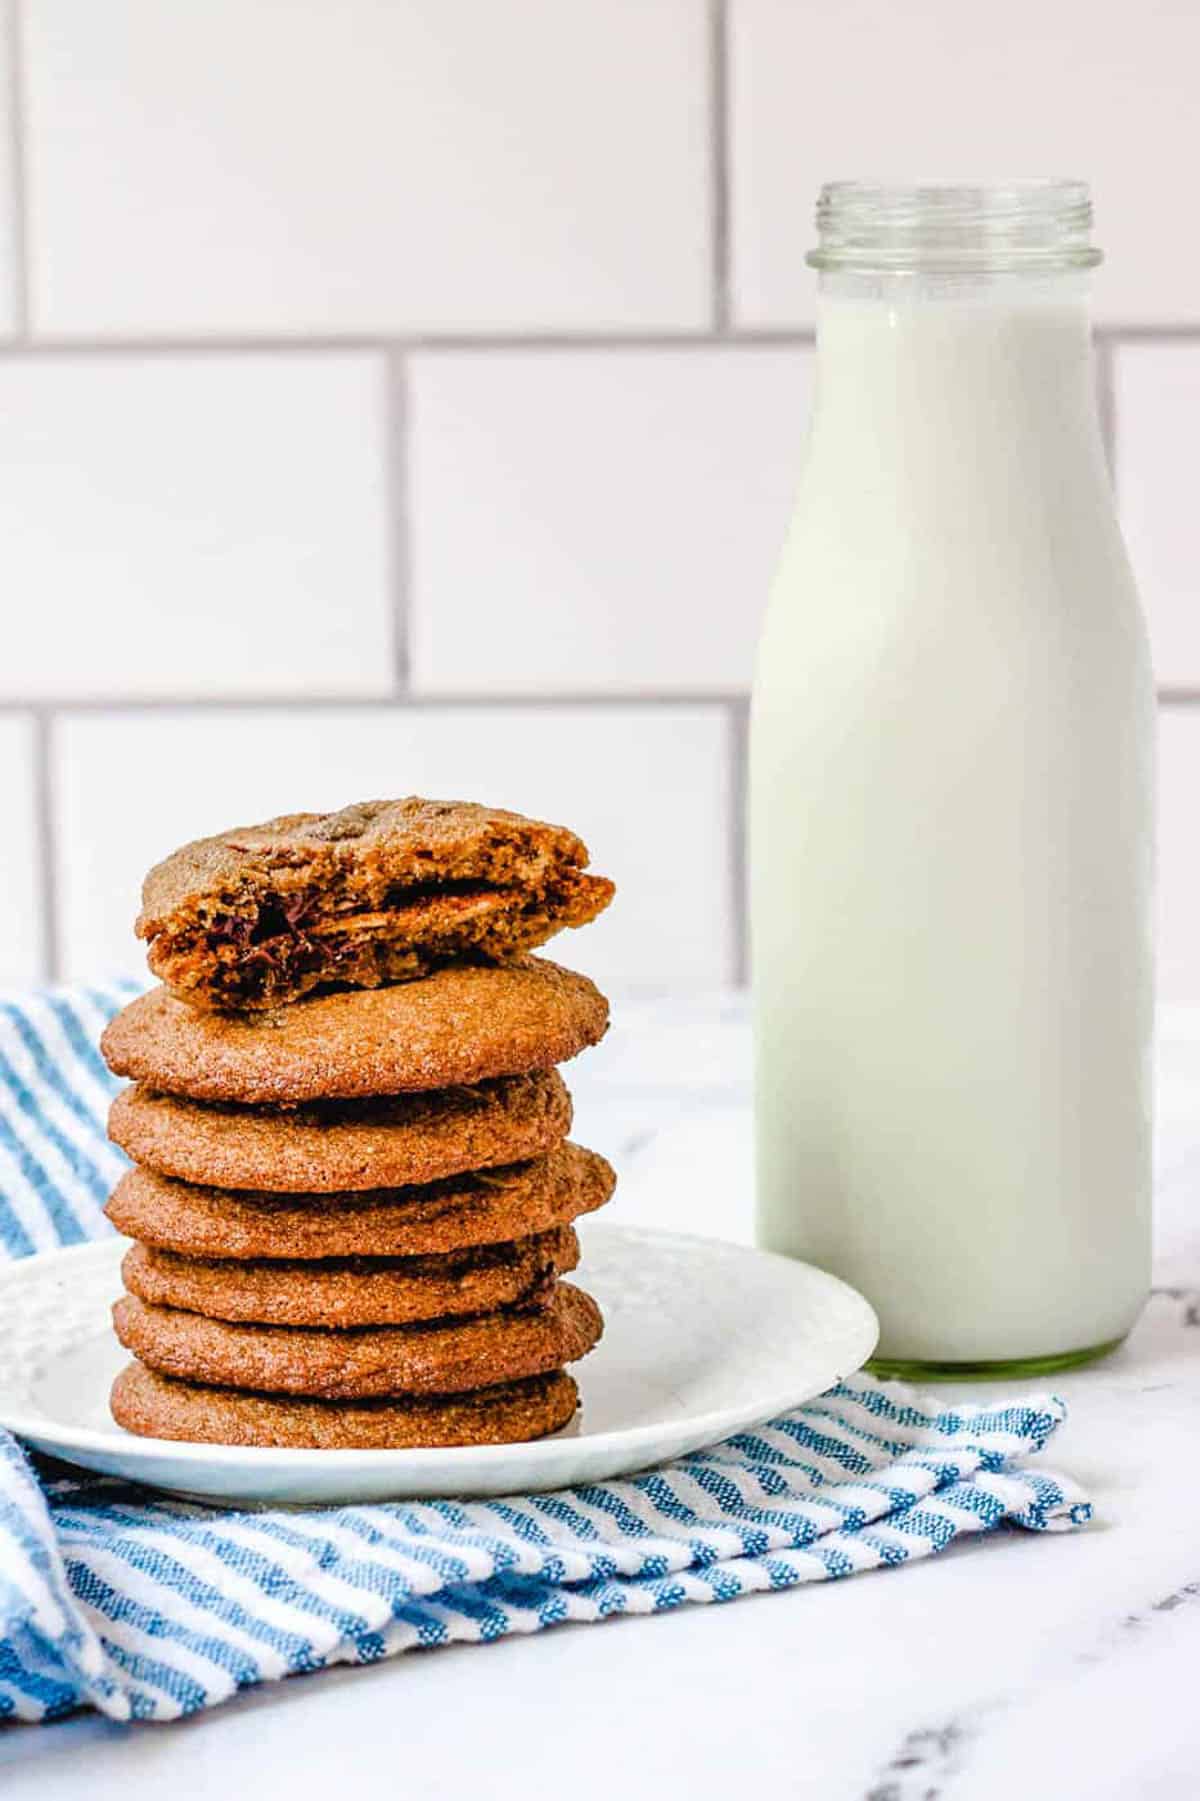 Healthy chocolate chip cookies stacked on a white plate with a carafe of milk on the side.